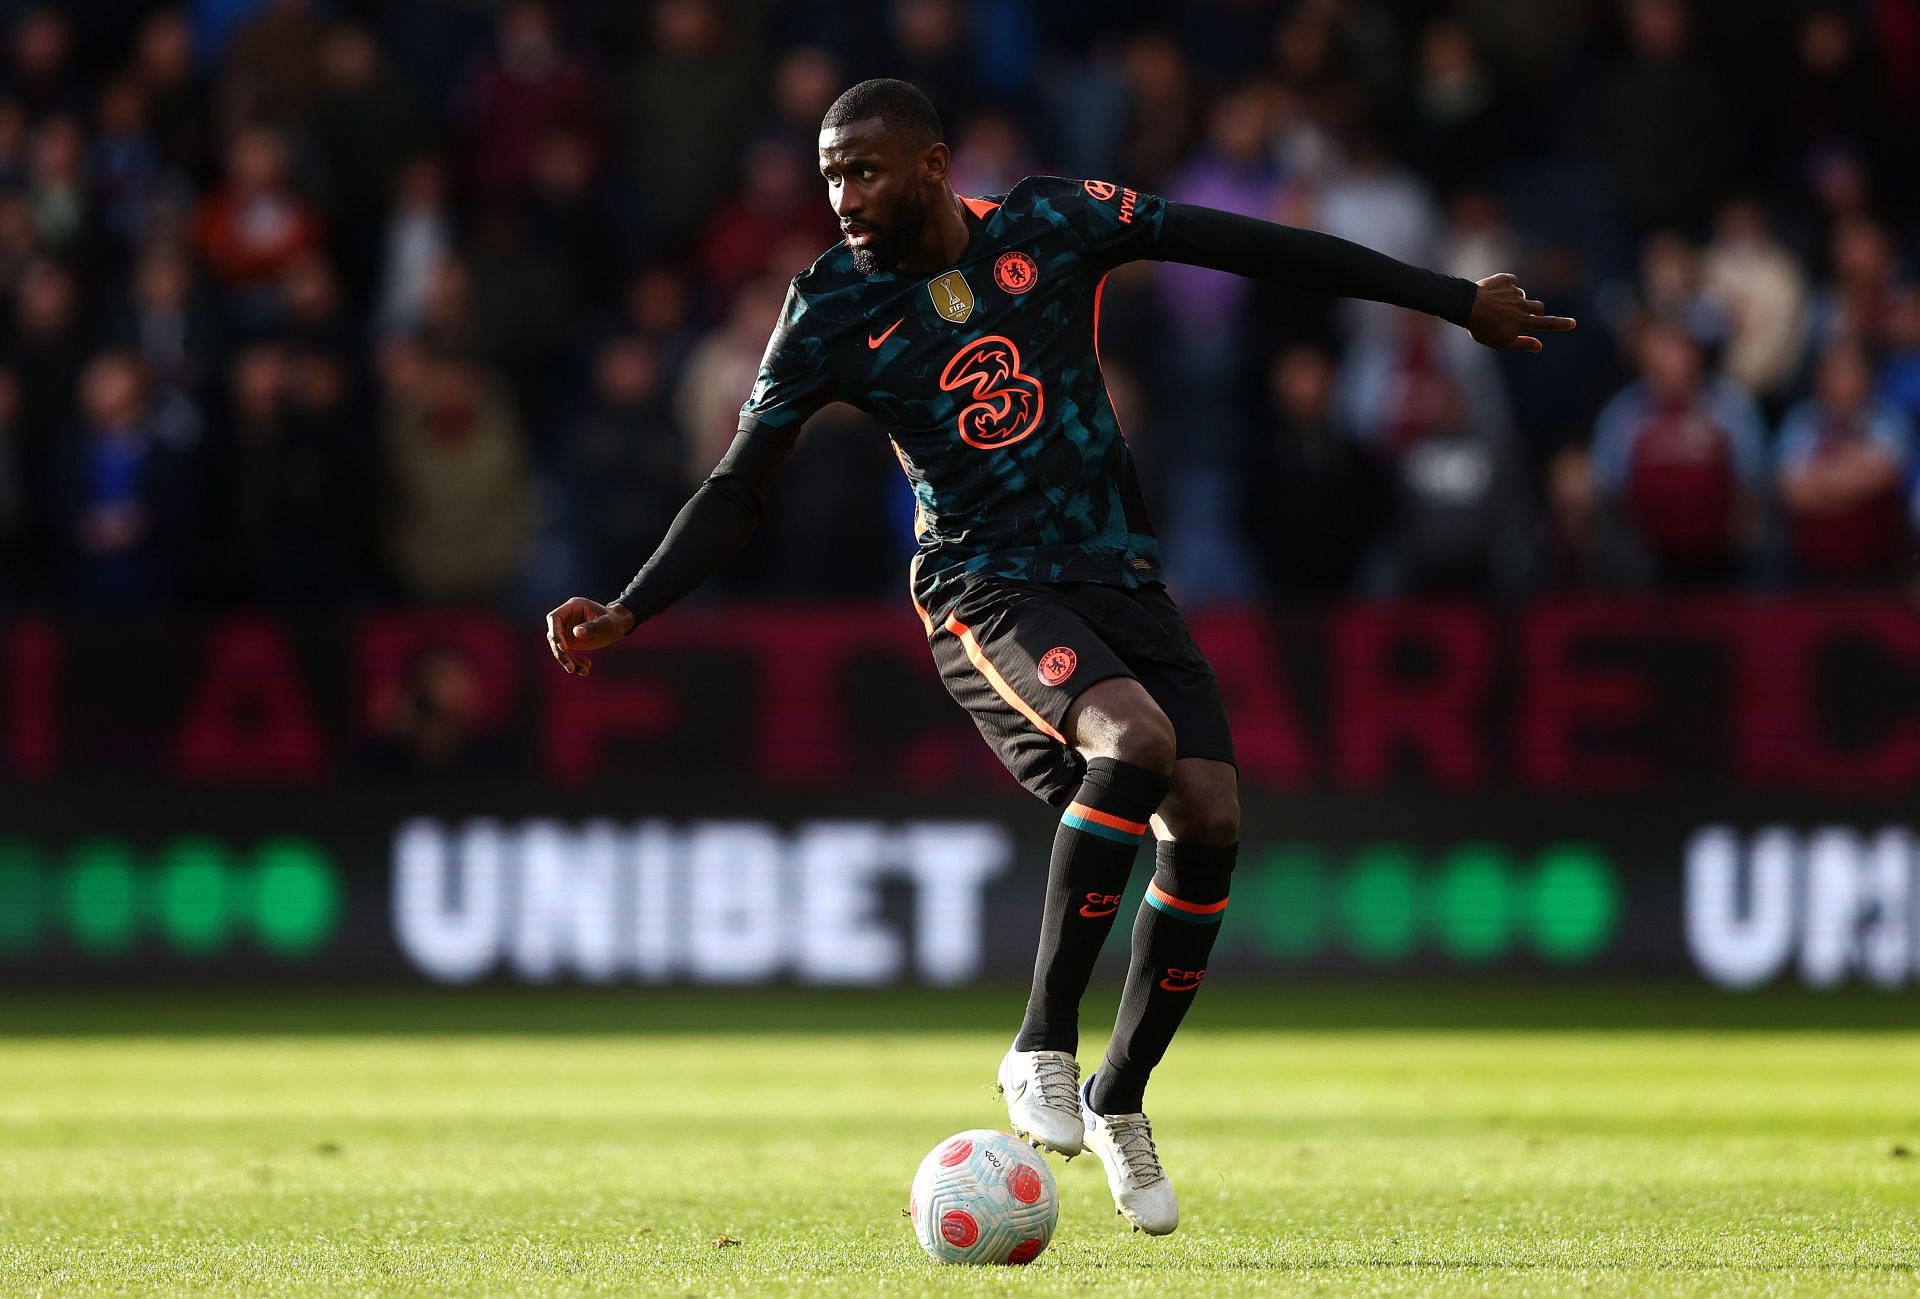 Antonio Rudiger on the ball against Burnley in the Premier League